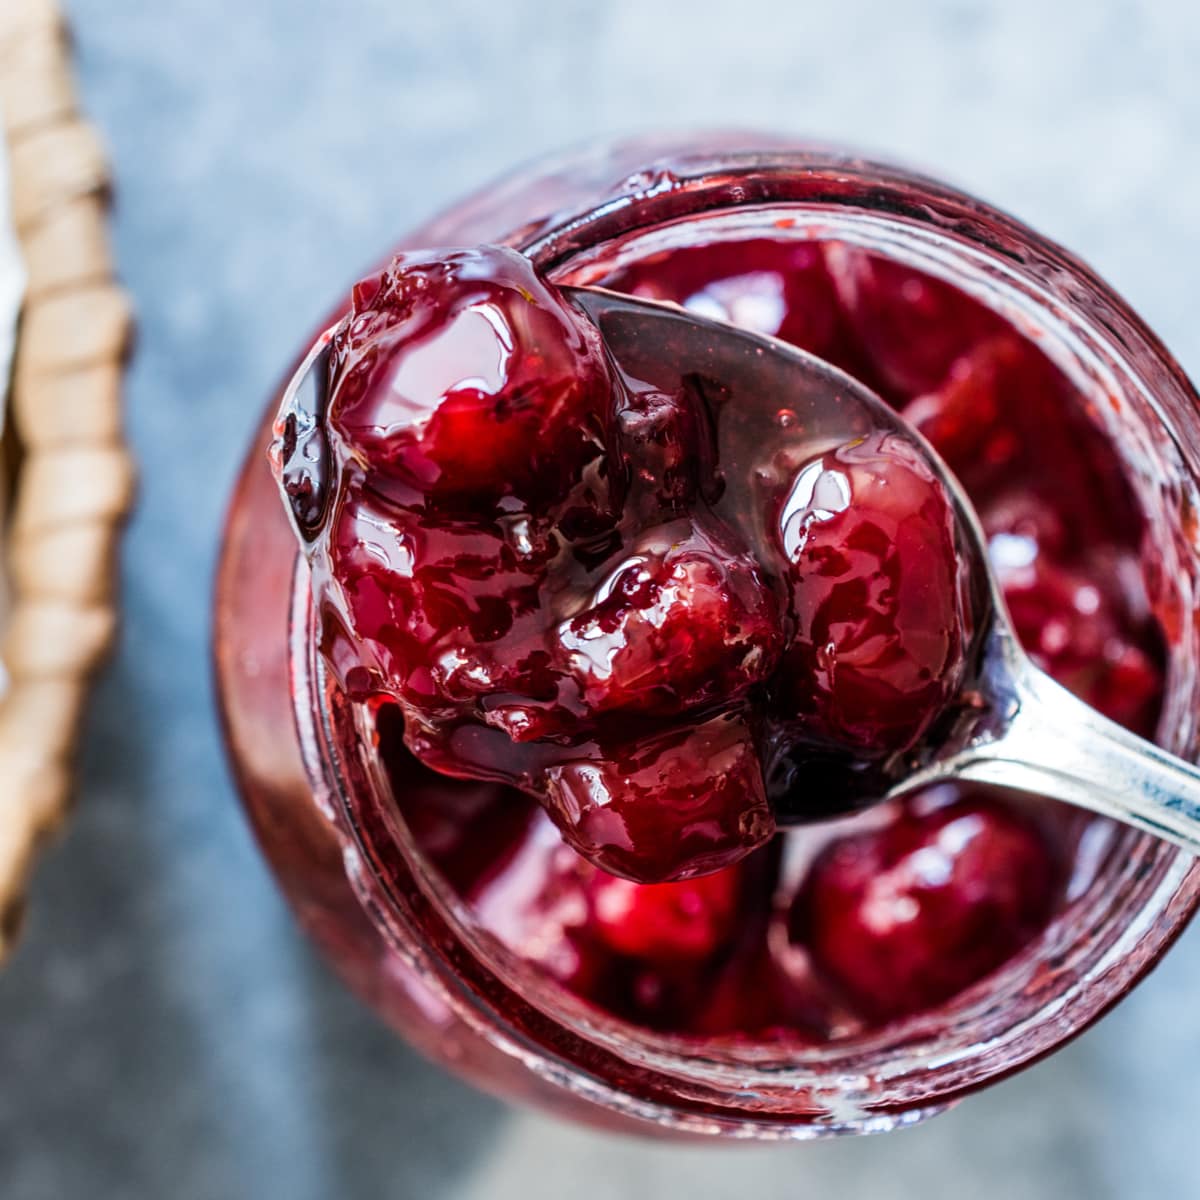 Ocean Spray Cranberry Sauce Scooped by a Spoon From a Glass Jar